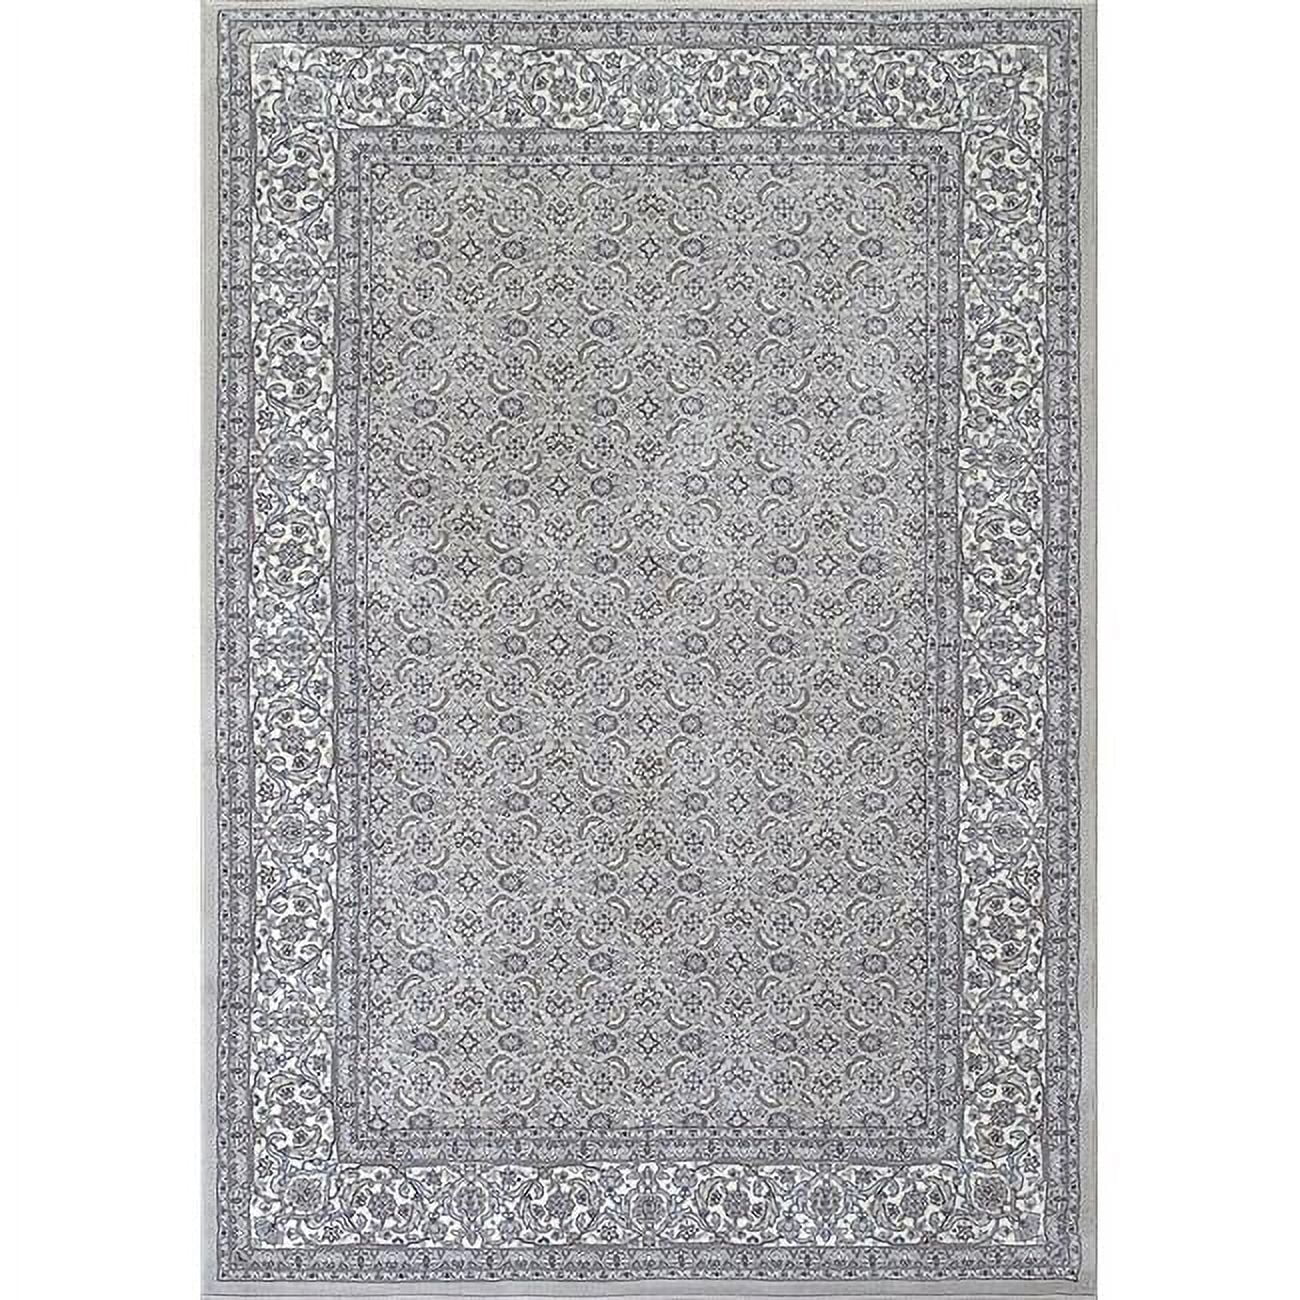 An912570119666 7 Ft. 10 In. X 11 Ft. 2 In. Ancient 57011 Rectangle Traditional Rug - 9666 Soft Grey & Cream